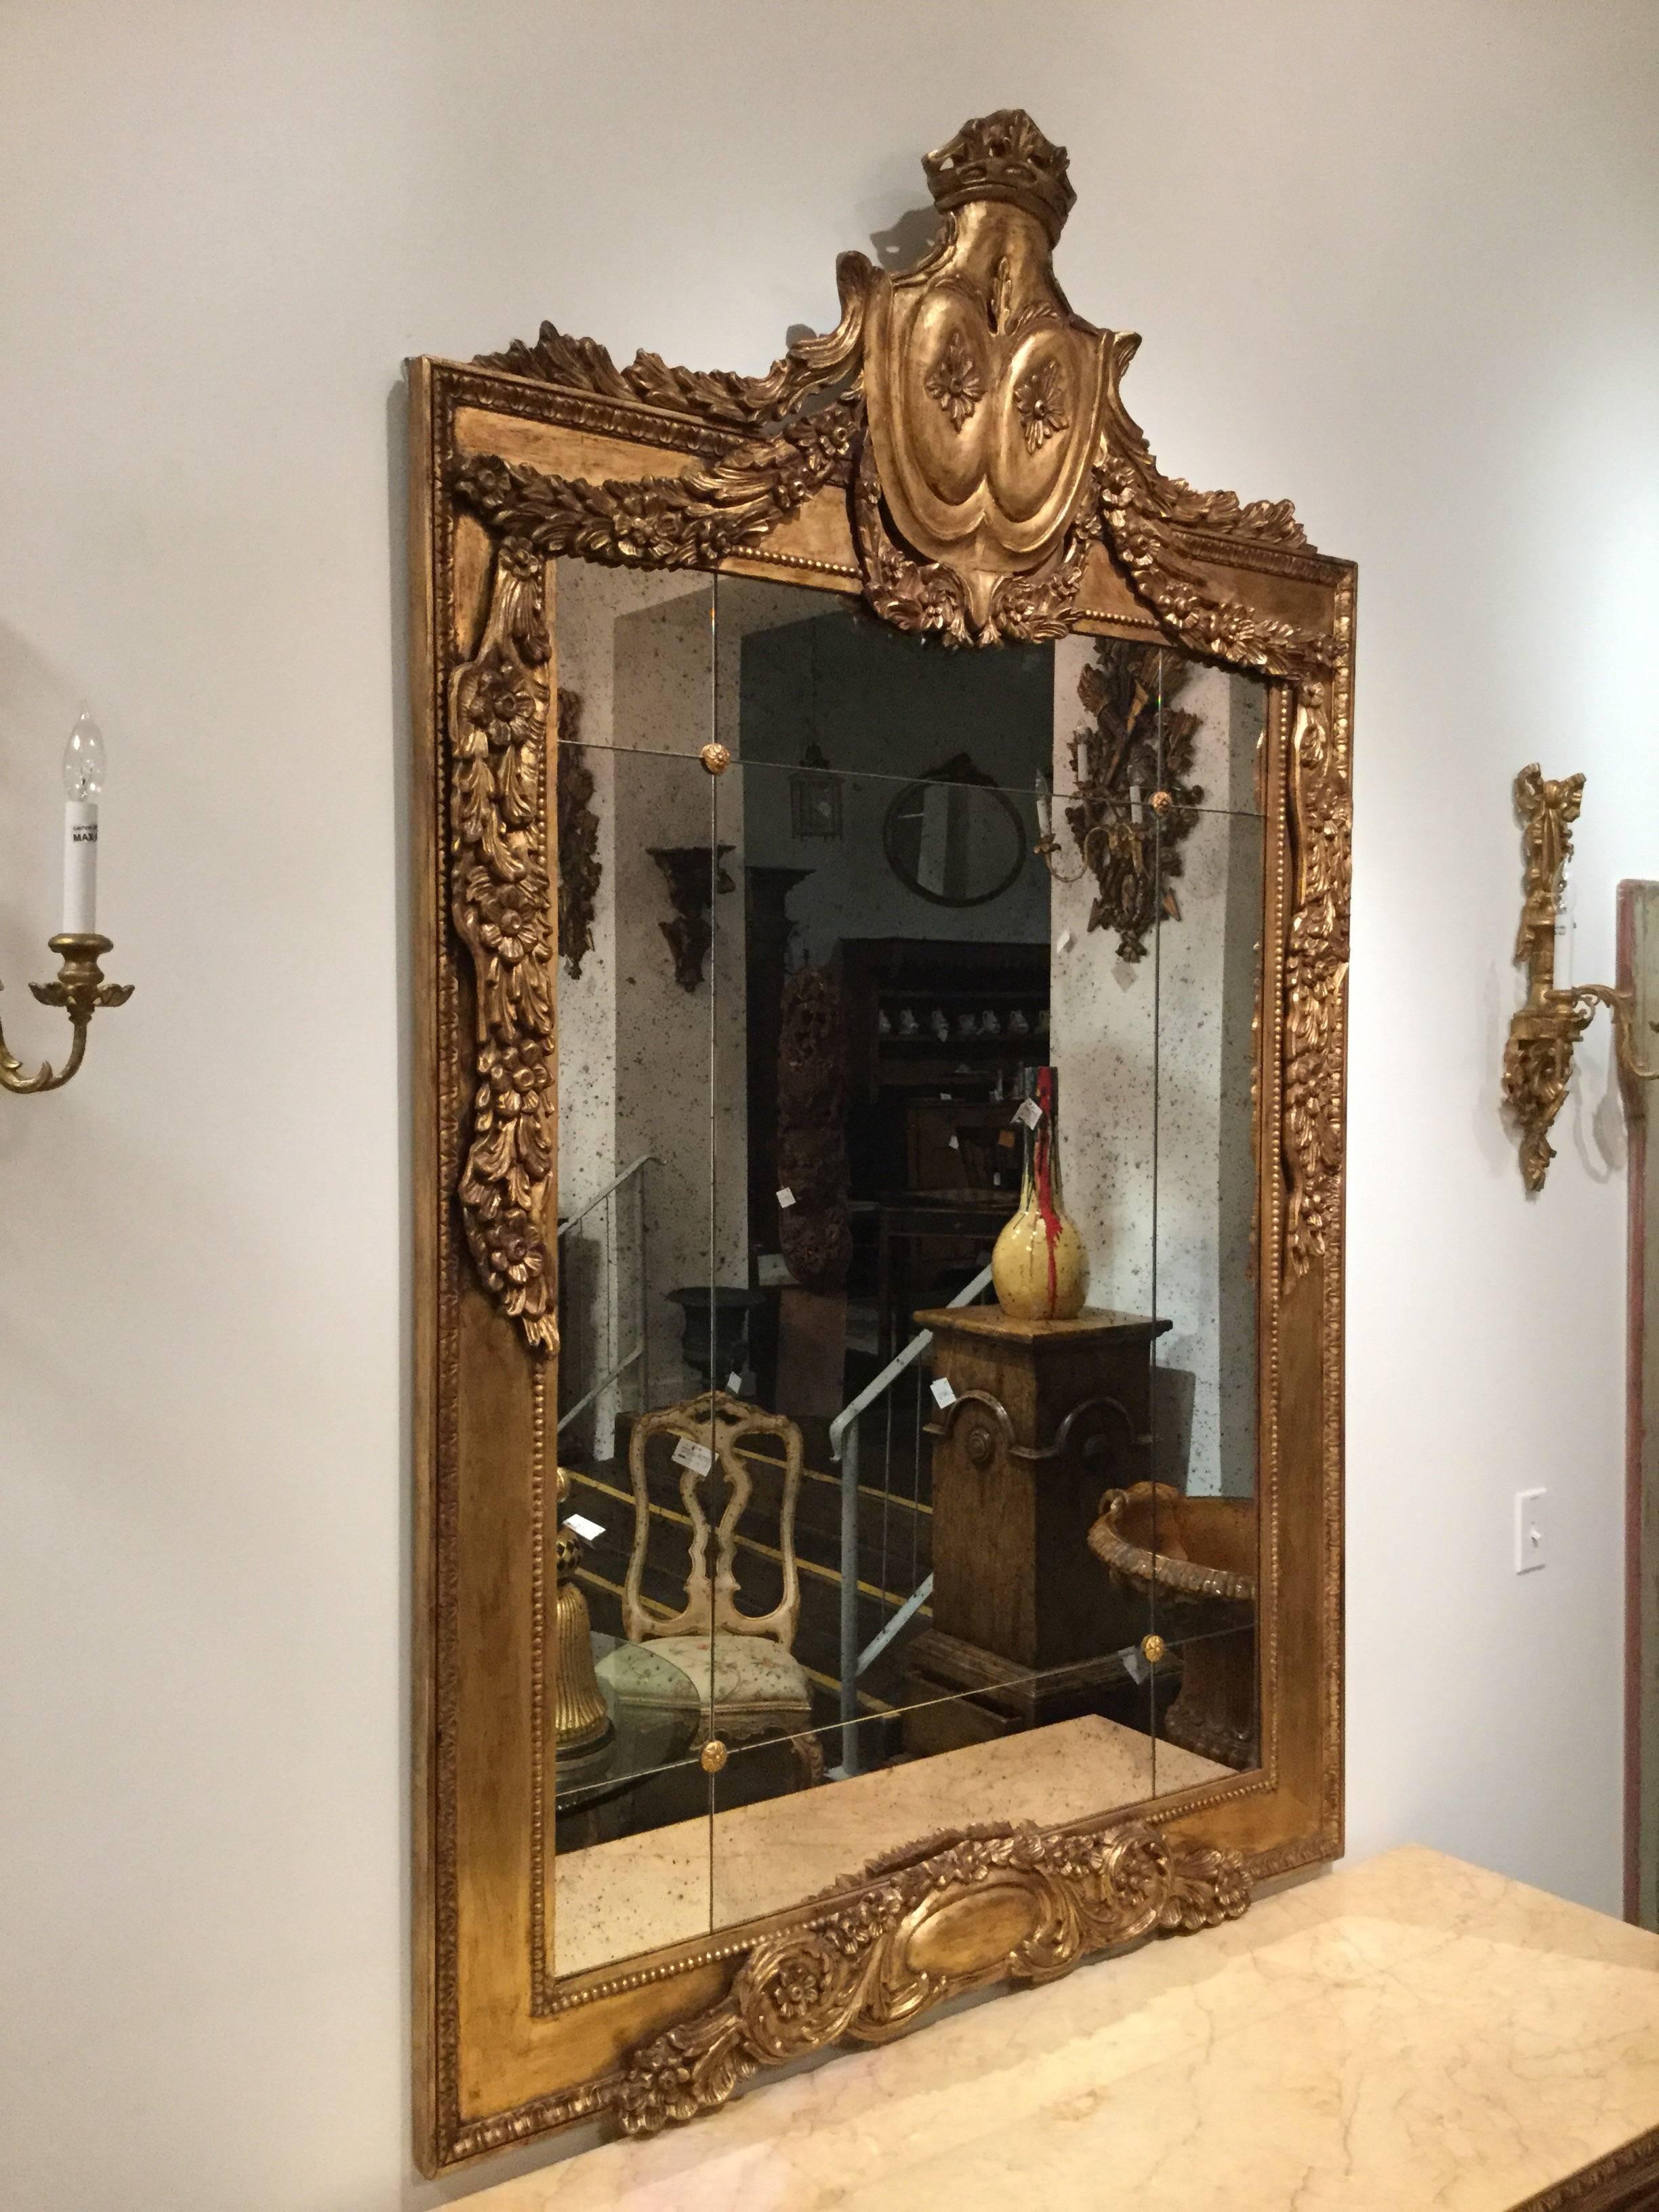 Magnificent Louis XVI style hand-carved mirror with rosettes and antiqued mirror inset, featuring an antiqued gold gilt finish, Italy.